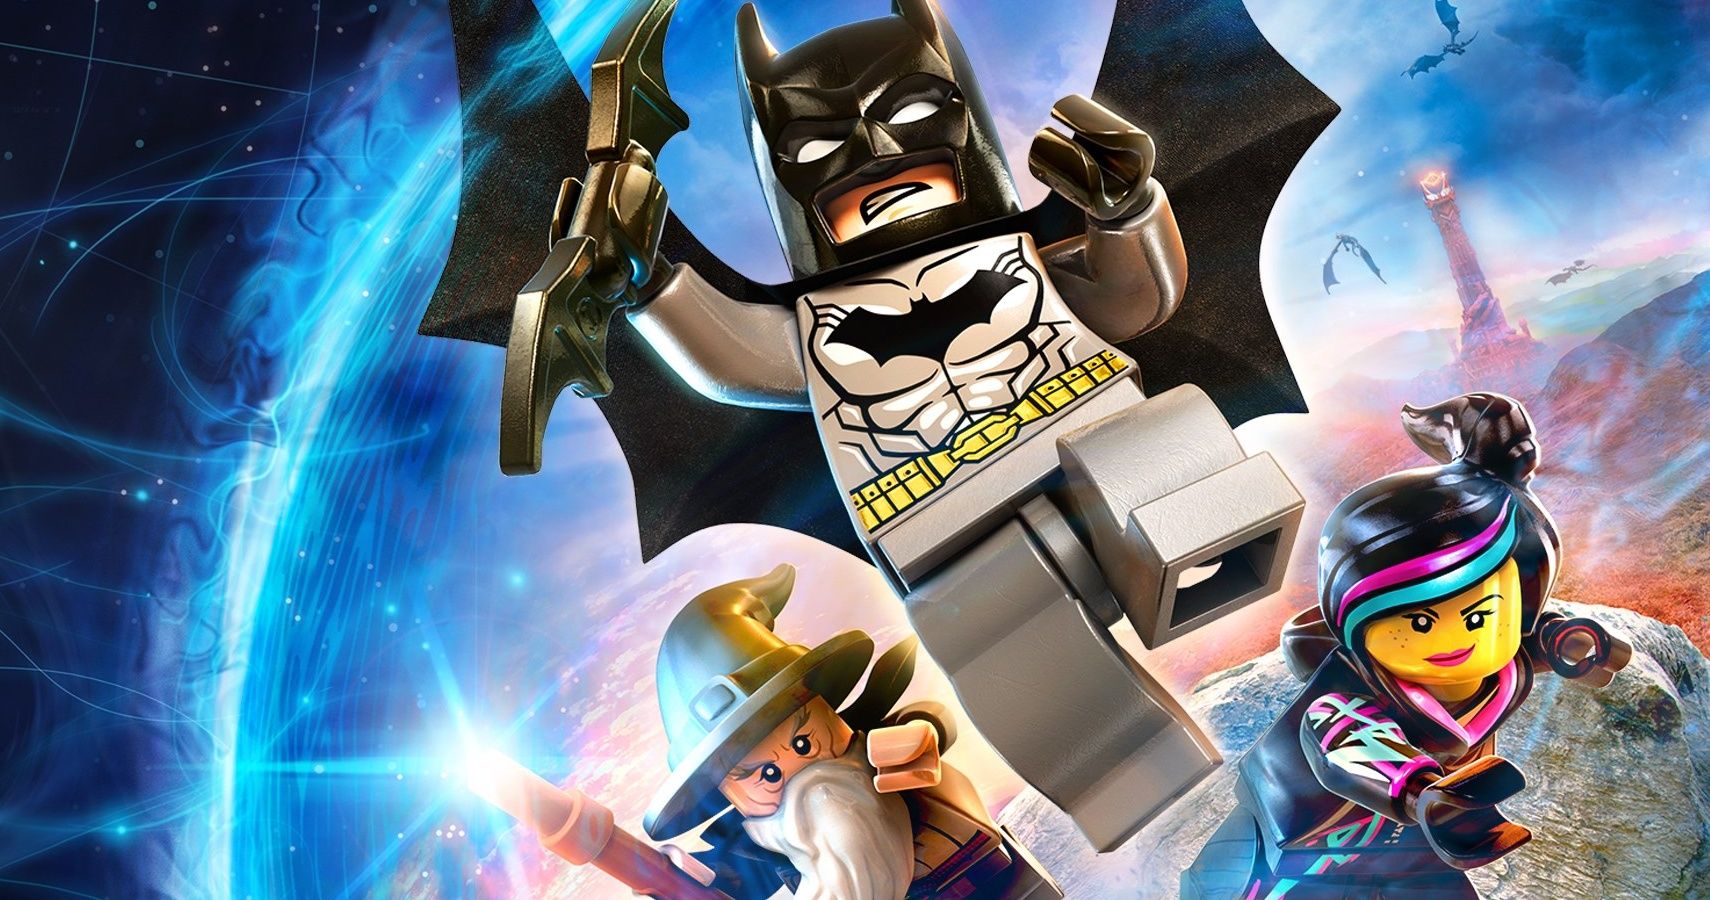 10 Best LEGO games Ever Made (According To Metacritic)